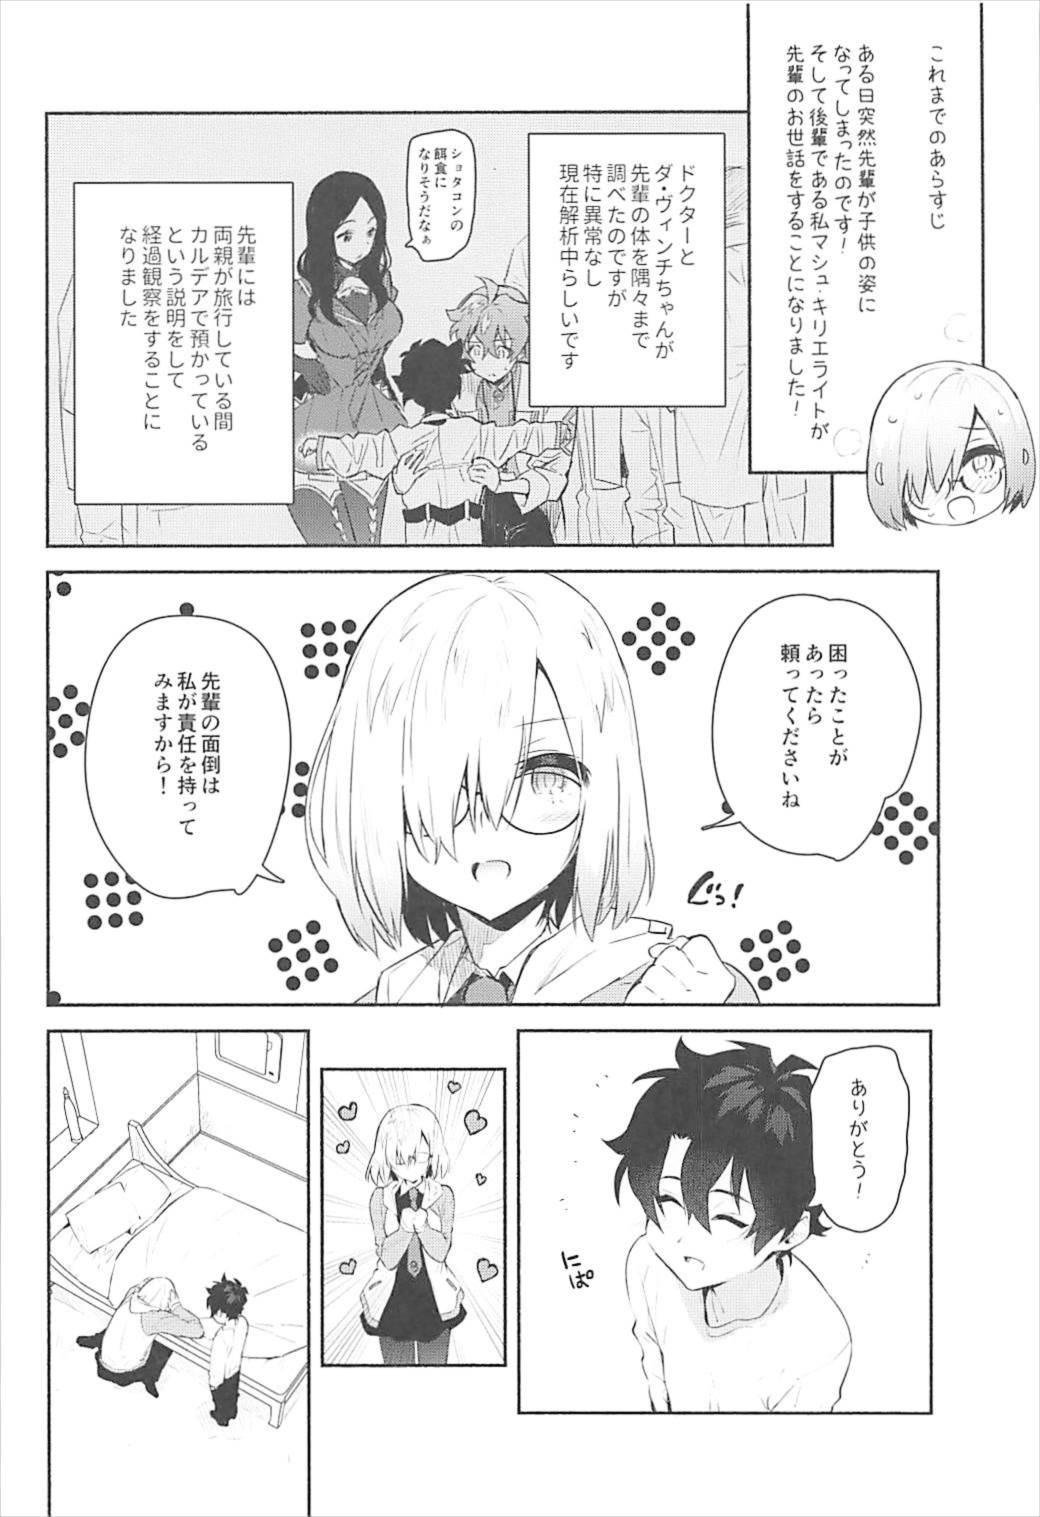 Buttfucking Mash to Issho - Fate grand order Gorda - Page 5